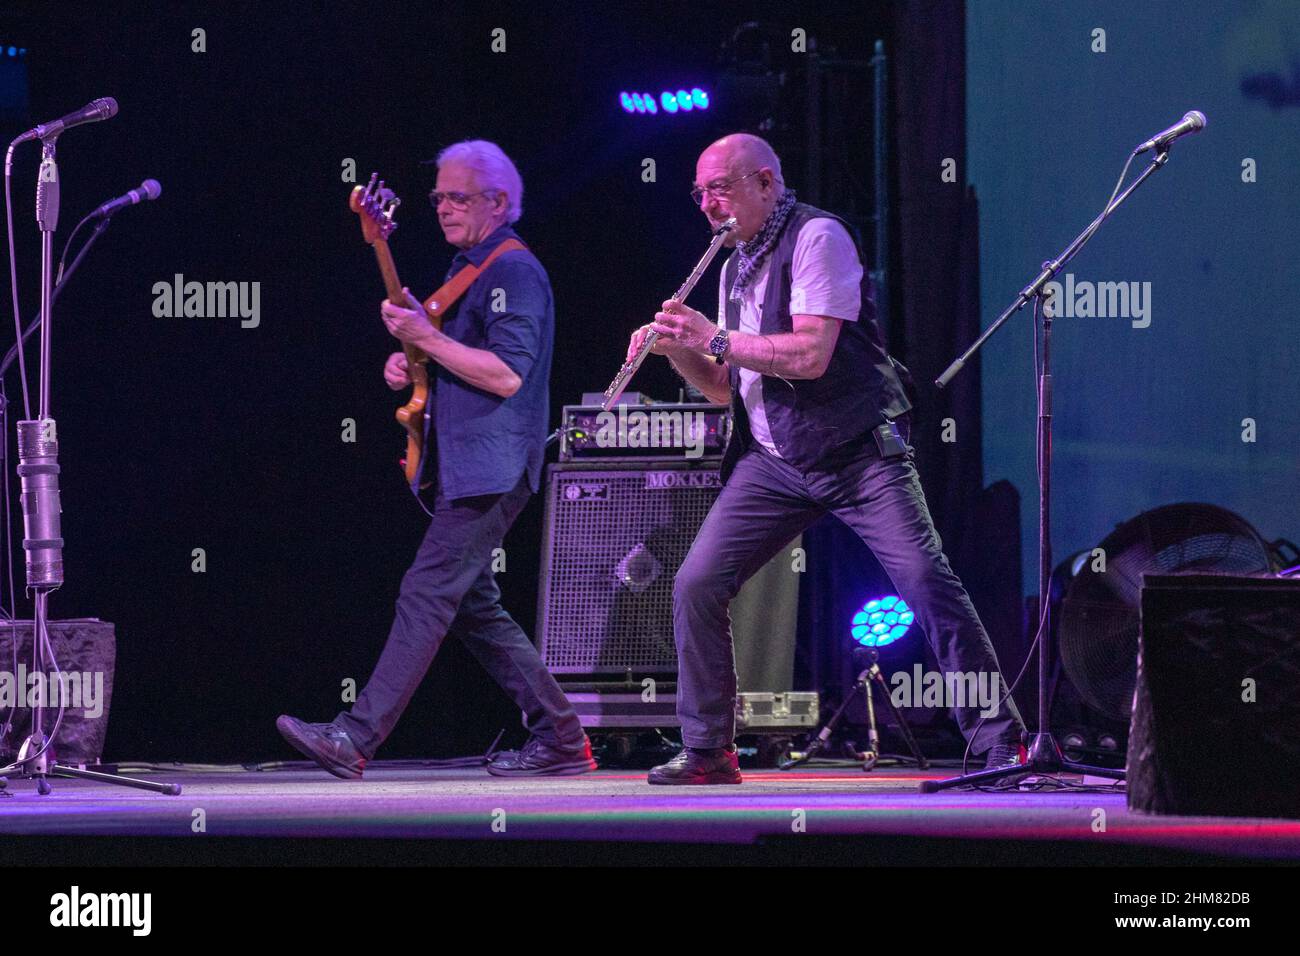 Gran Teatro Geox, Padova, Italy, February 06, 2022, Ian Anderson during  2022 JETHRO TULL tour The Prog Years - Music Concert Stock Photo - Alamy